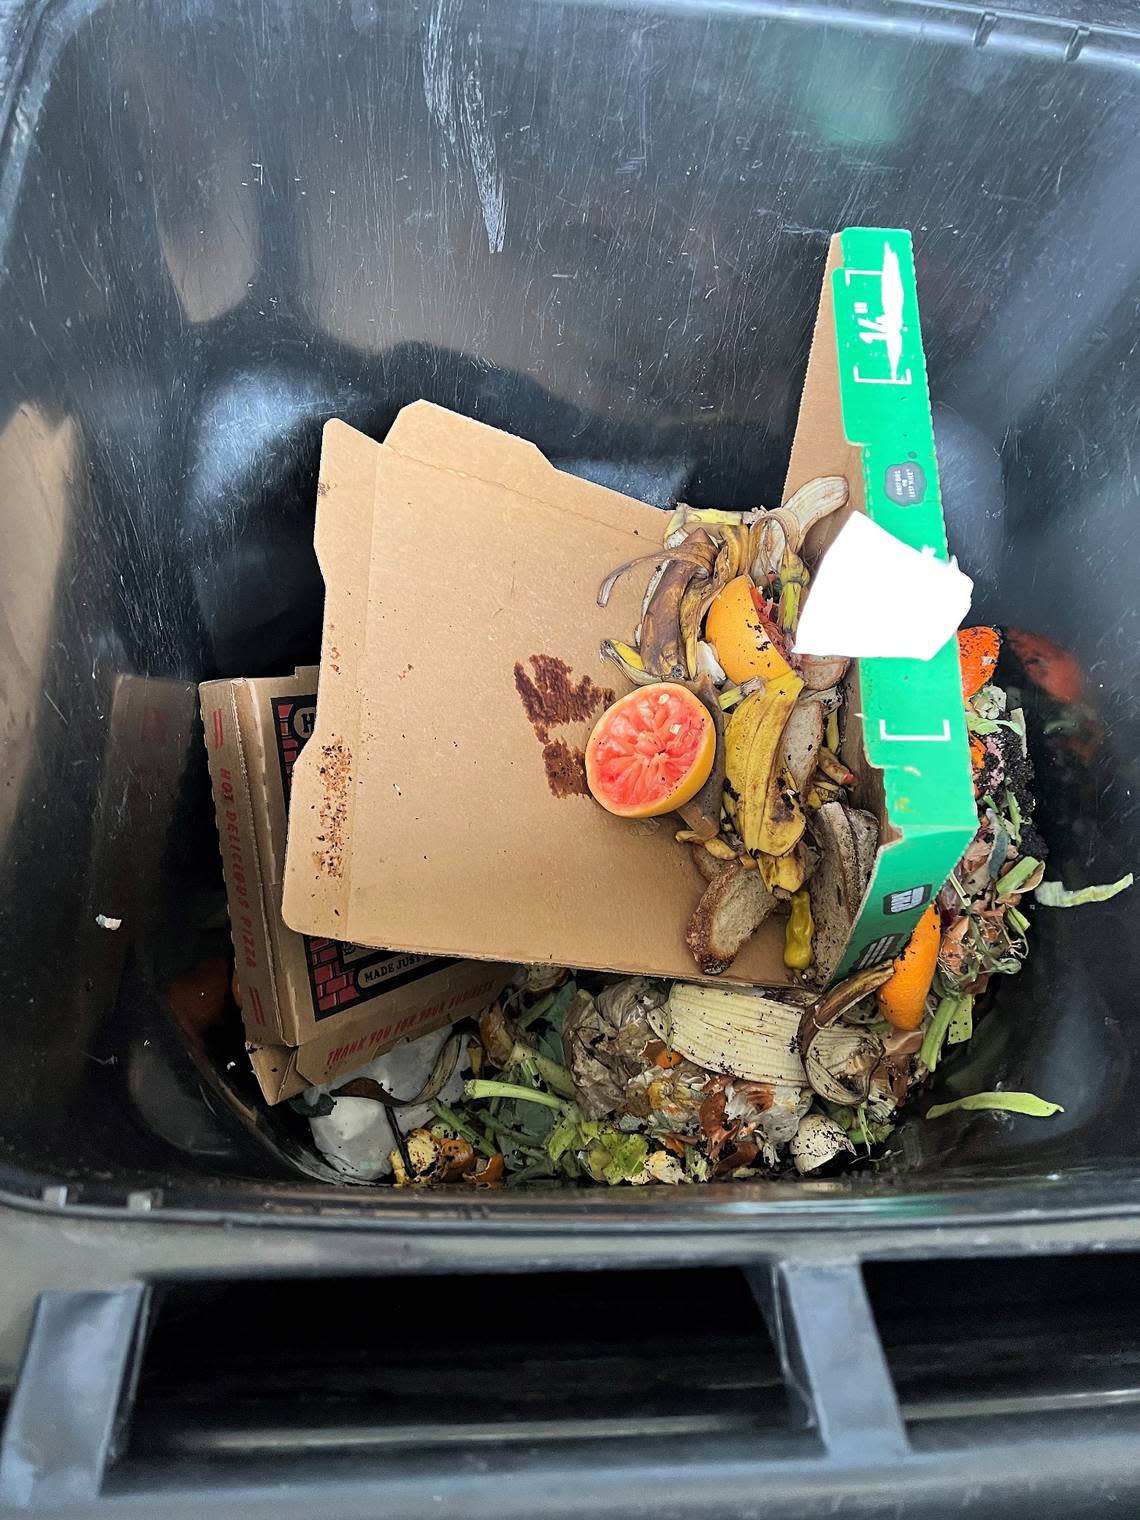 At the Cary food waste drop-off, residents can dump their old pizza boxes, egg shells, raw or cooked fruits, vegetables, paper plates and paper towels or napkins and more into assorted bins for compost.